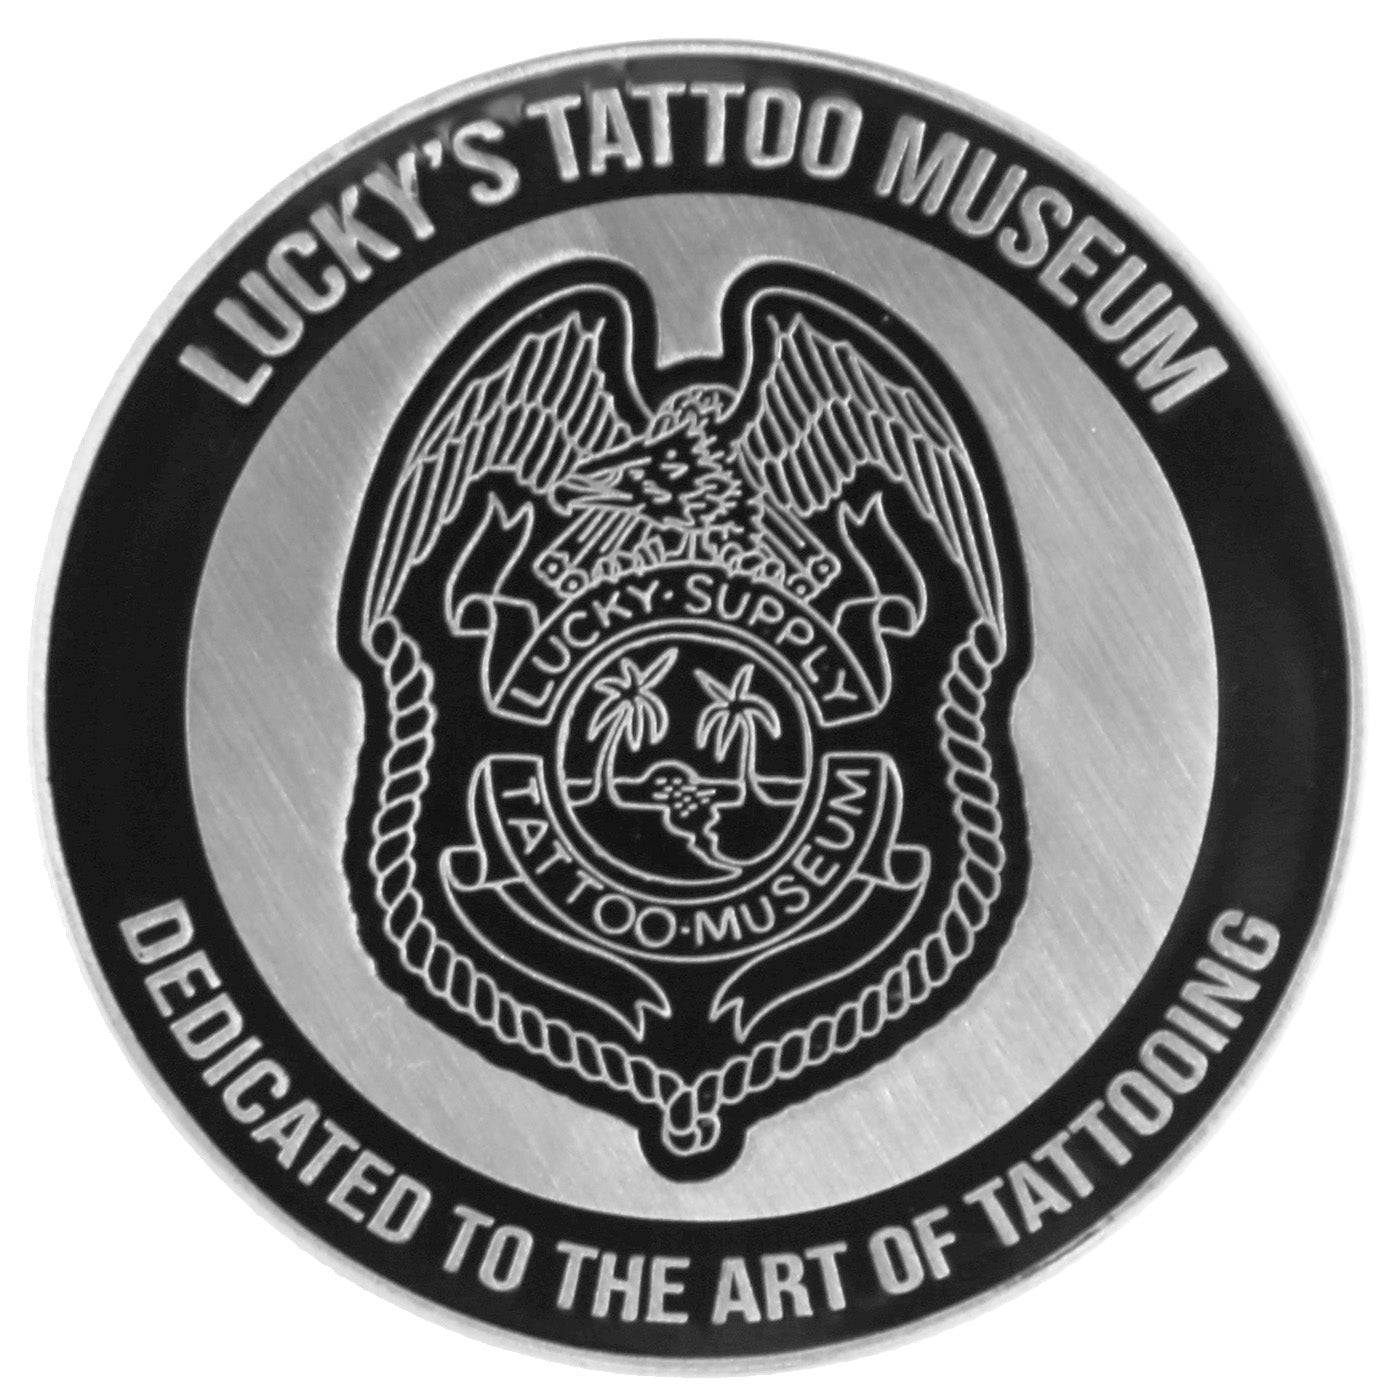 Lucky's Tattoo Museum 20 Year Anniversary Commemorative Coin